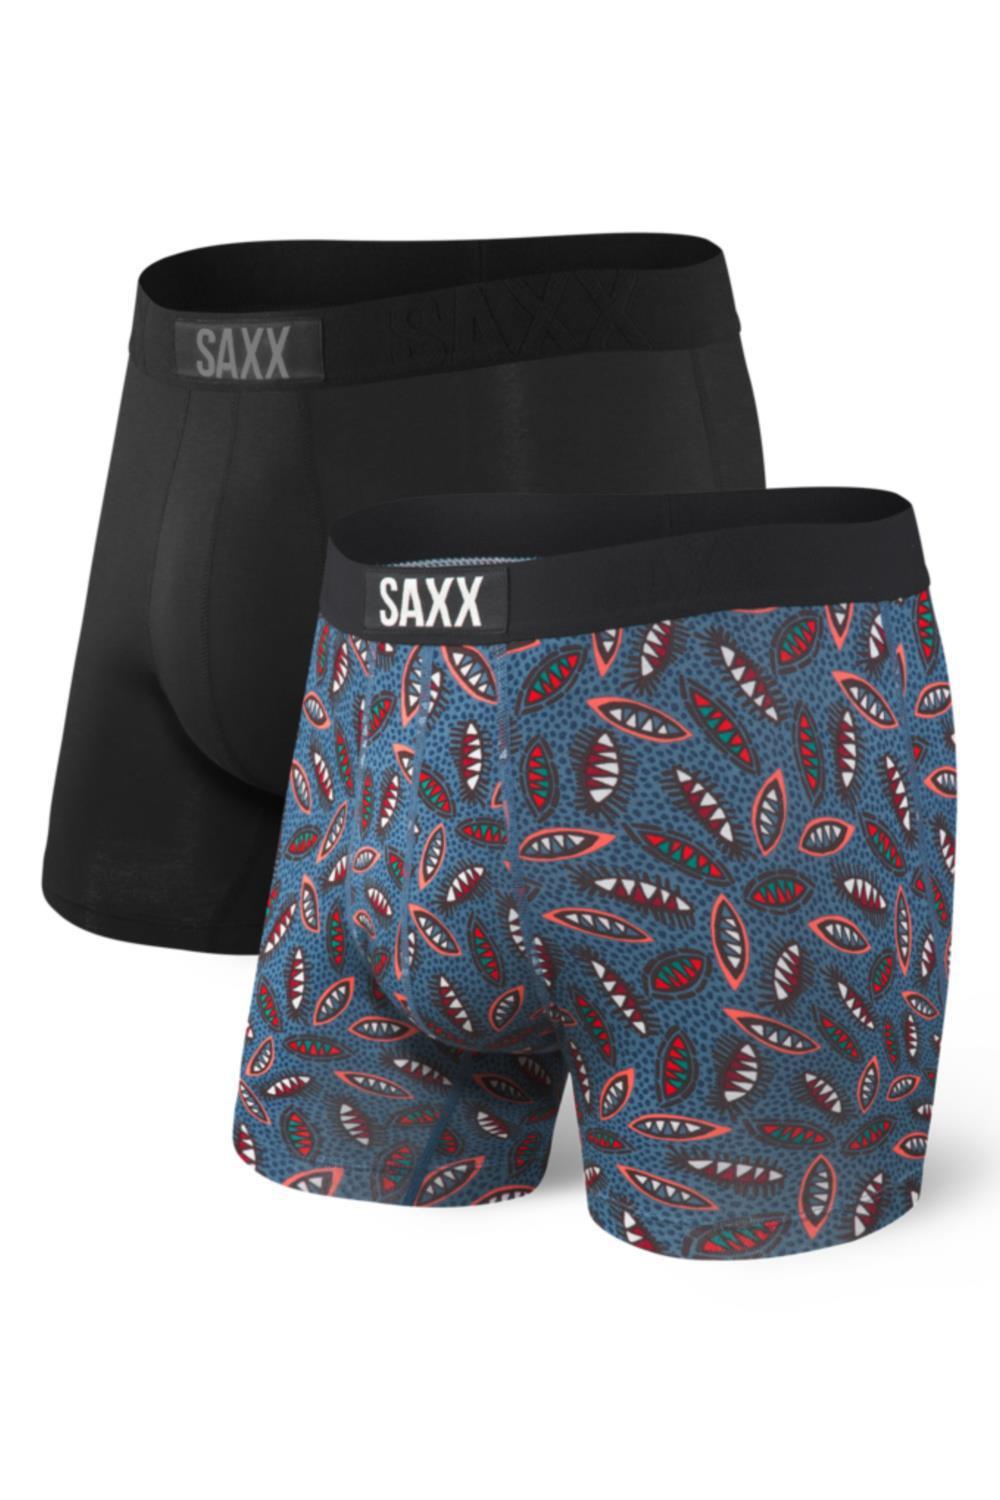  Vibe Boxer Brief 2pack (Solid + Pattern) Solid Black/Pattern